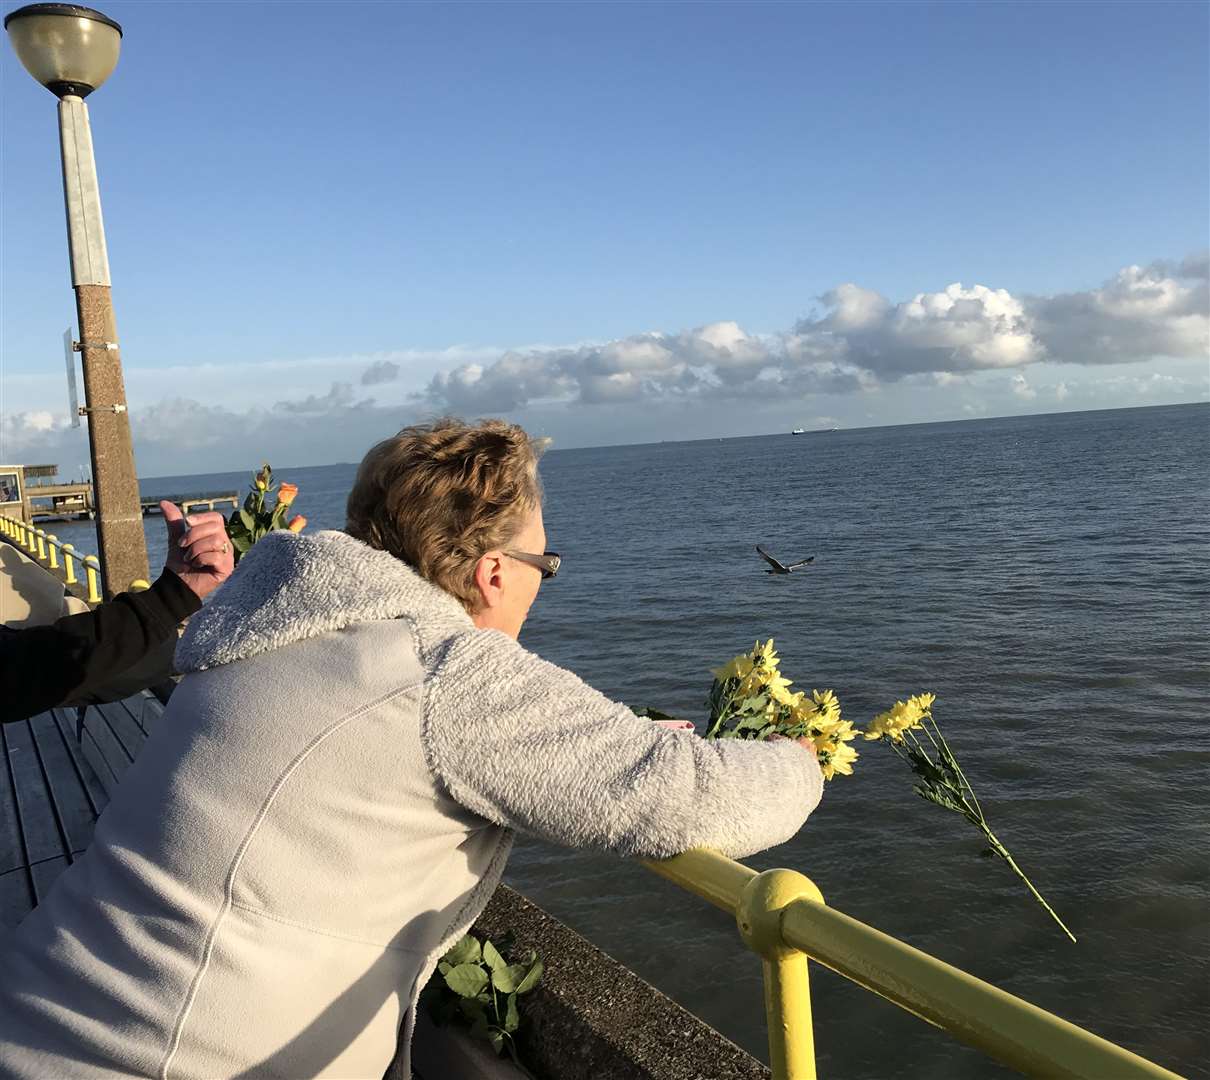 Friends and family of Debbie Griggs threw flowers in to the sea at Deal in her memory after Andrew Griggs' conviction for her murder